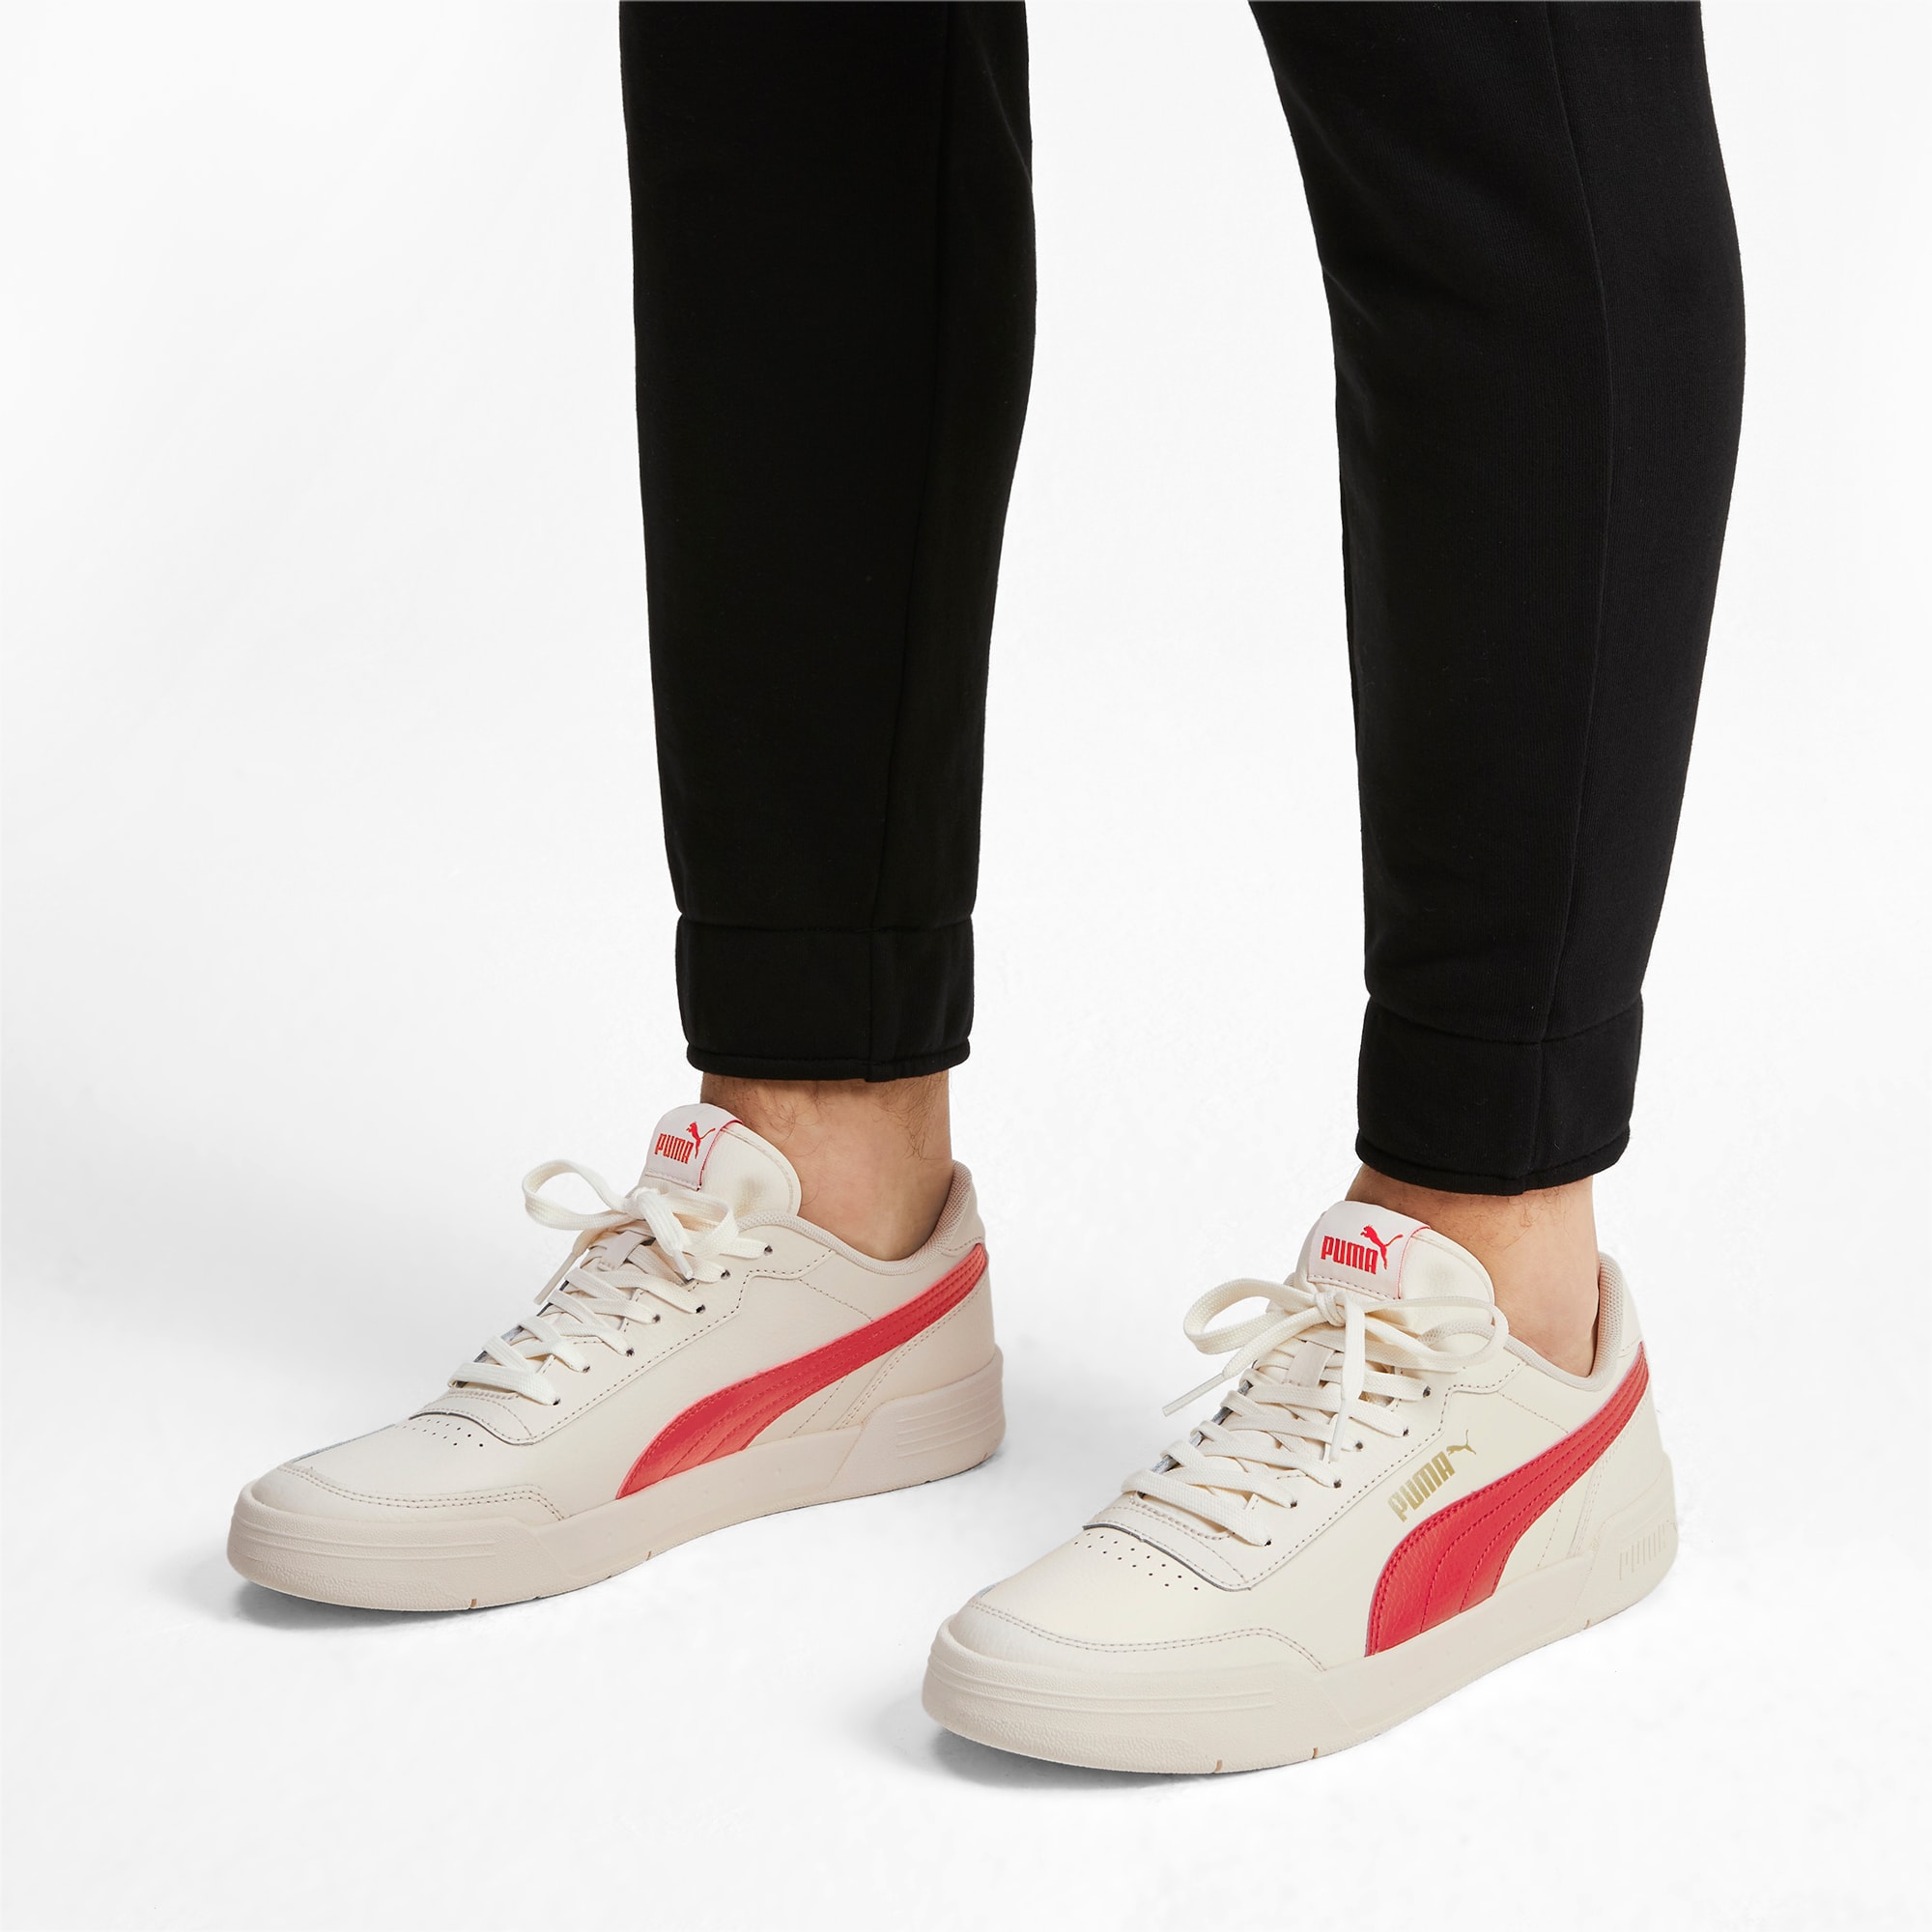 Caracal Trainers | Whisper White-High Risk Red | PUMA Shoes | PUMA